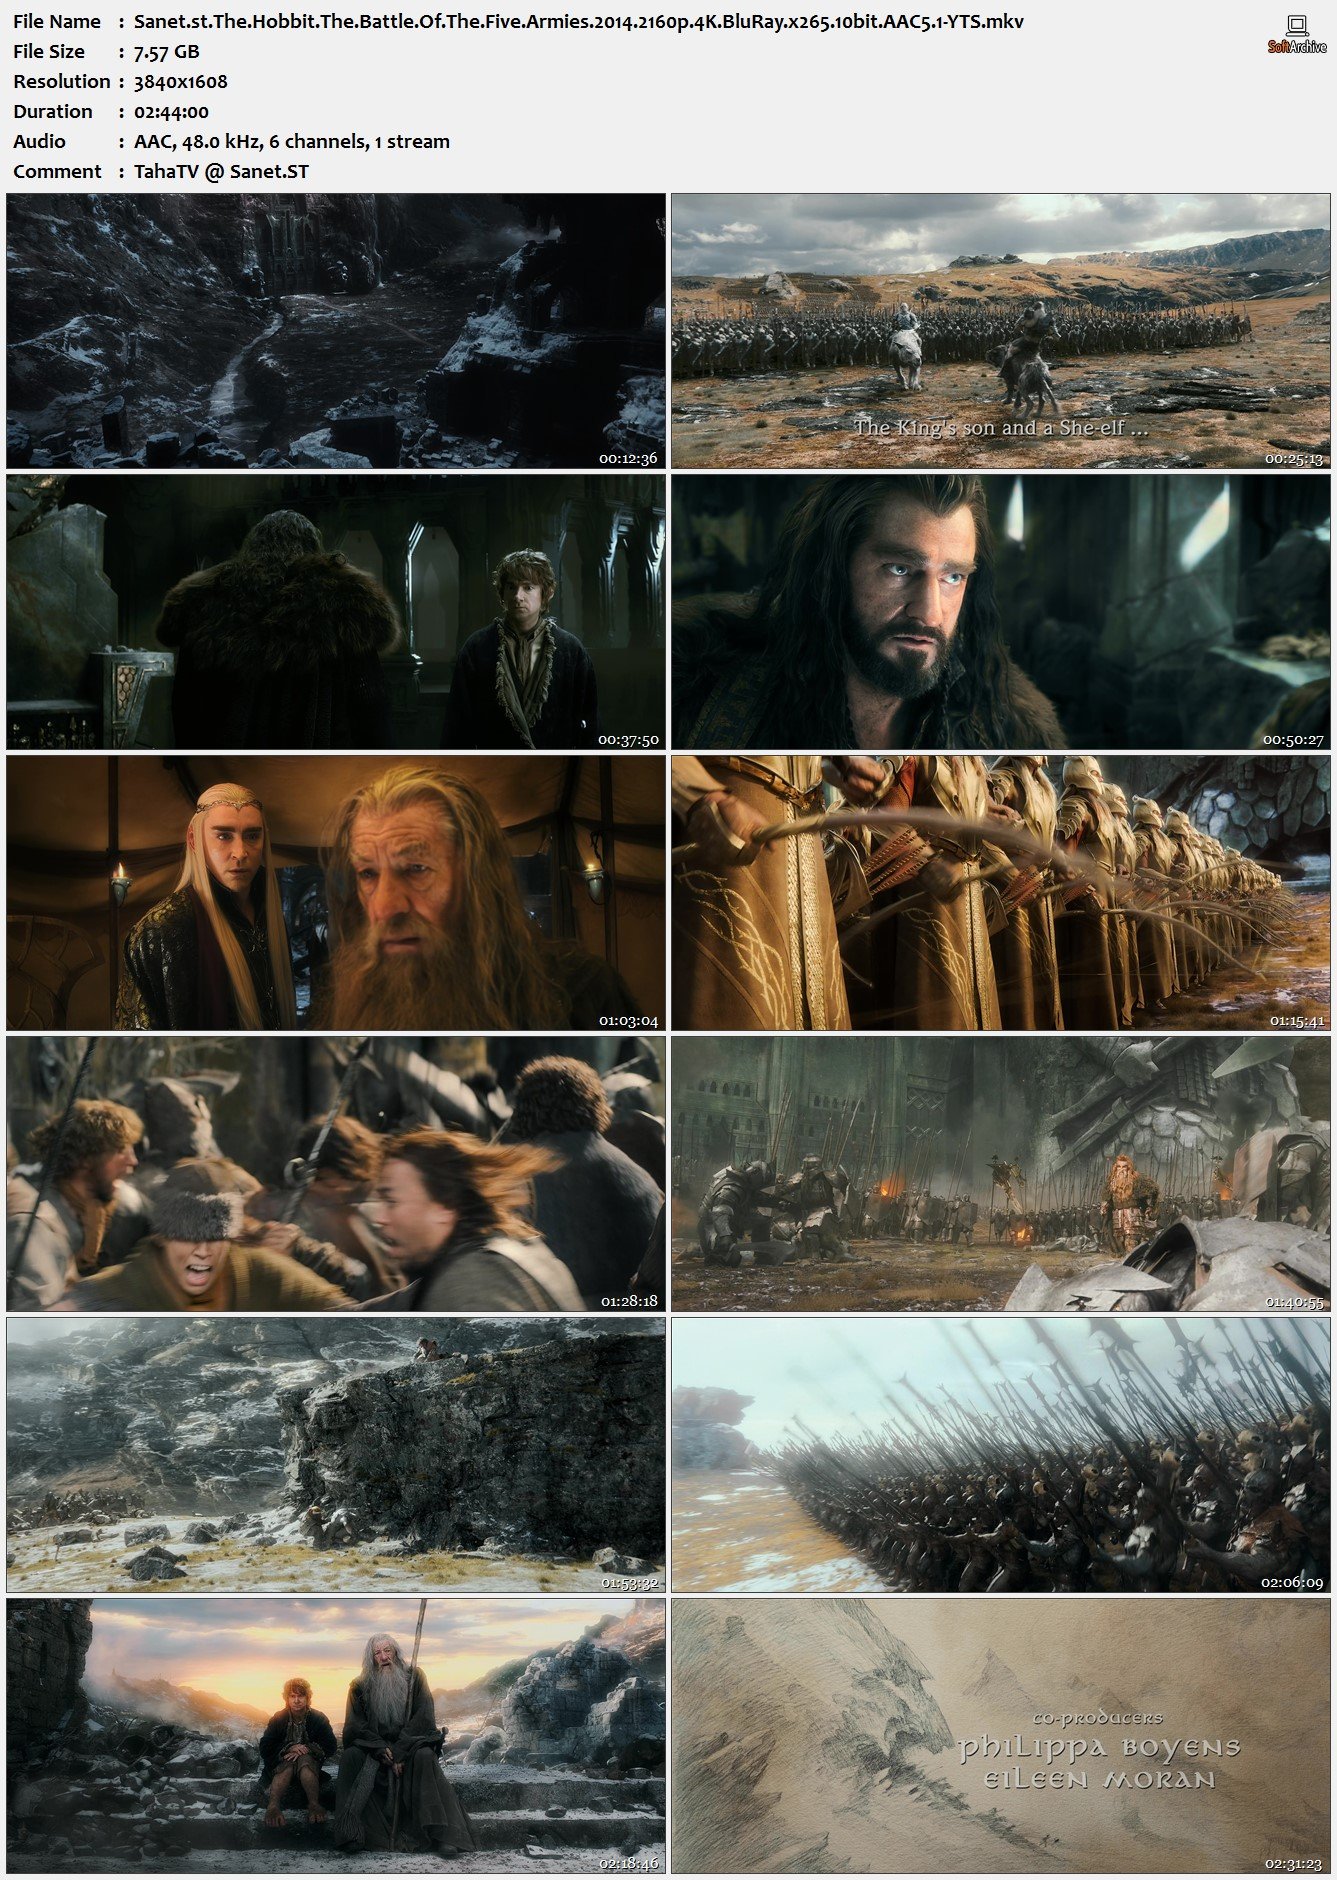 download the new version The Hobbit: The Battle of the Five Ar